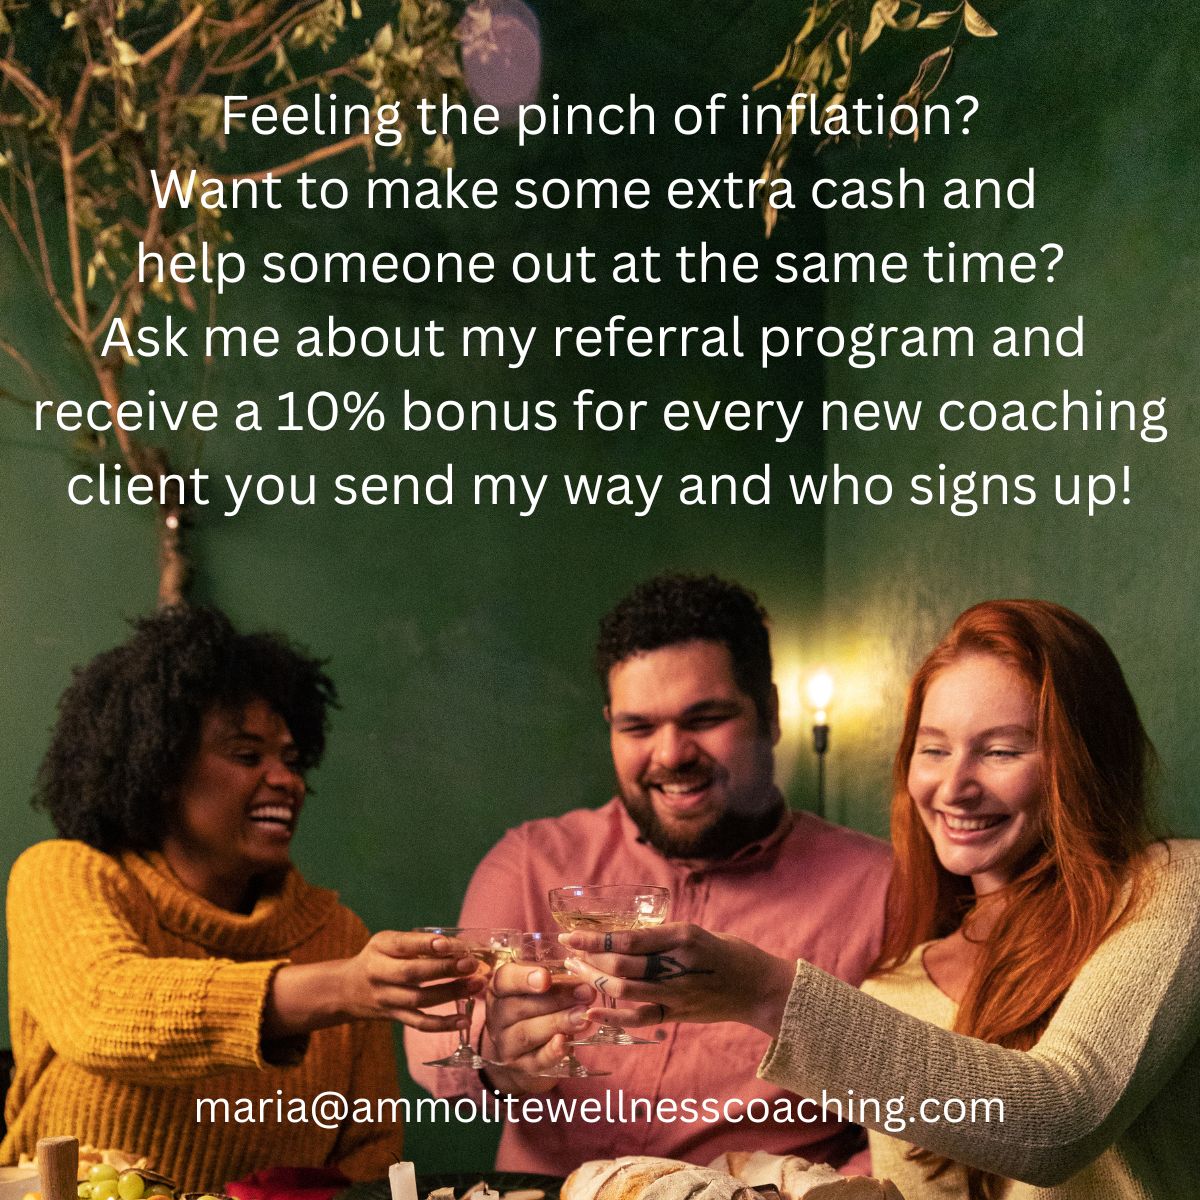 Ask me about my 10% Referral Program